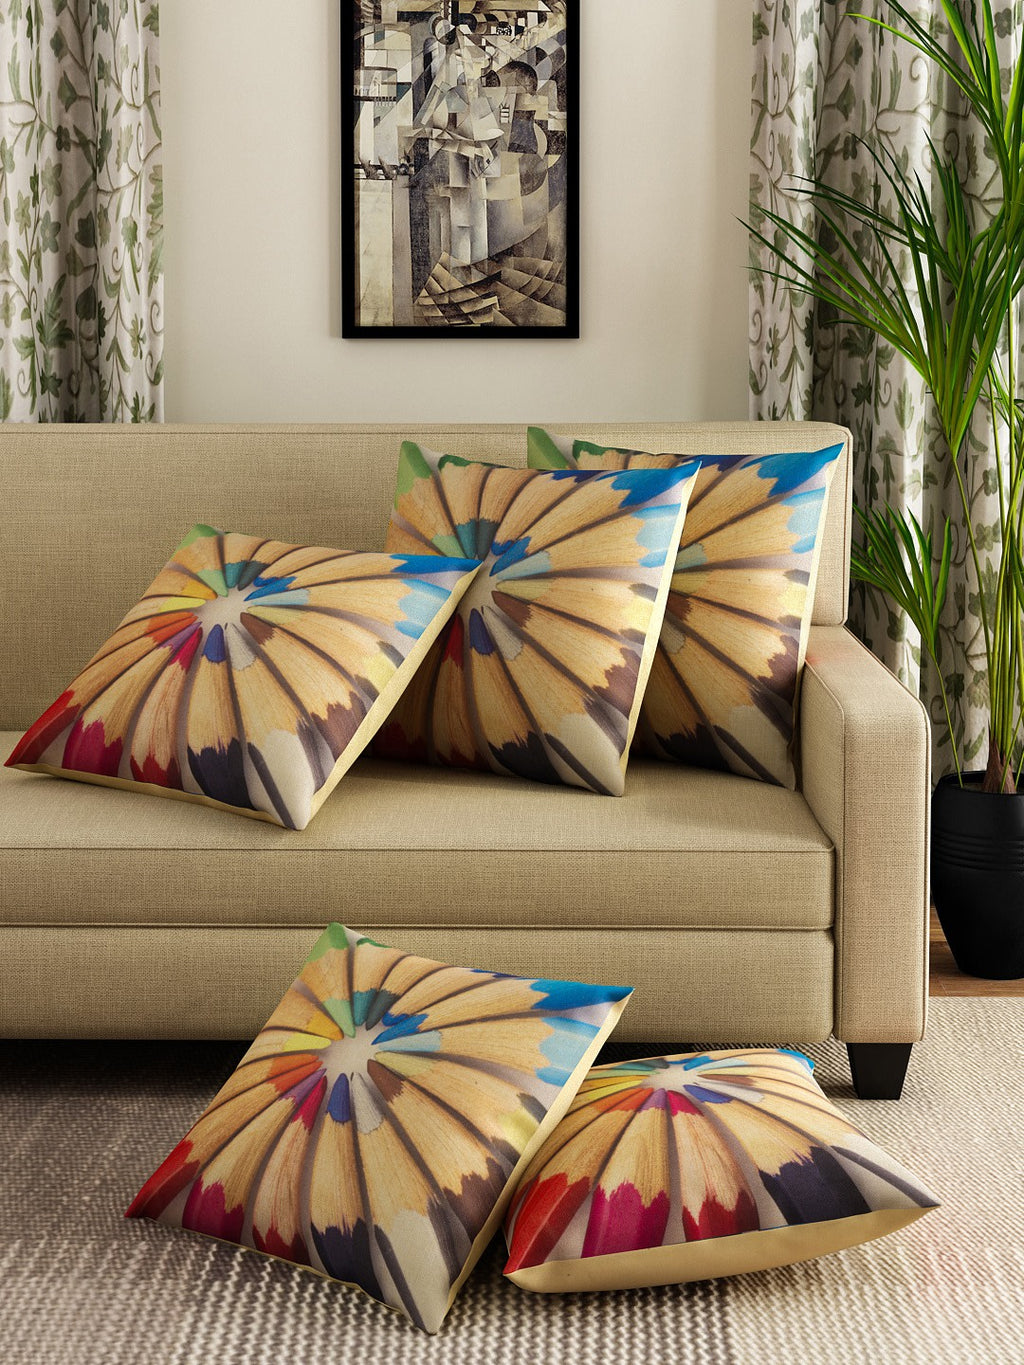 Detec™ Hosta Multi Color Printed 16 x 16 inches Cushion Cover (Set of 5 )